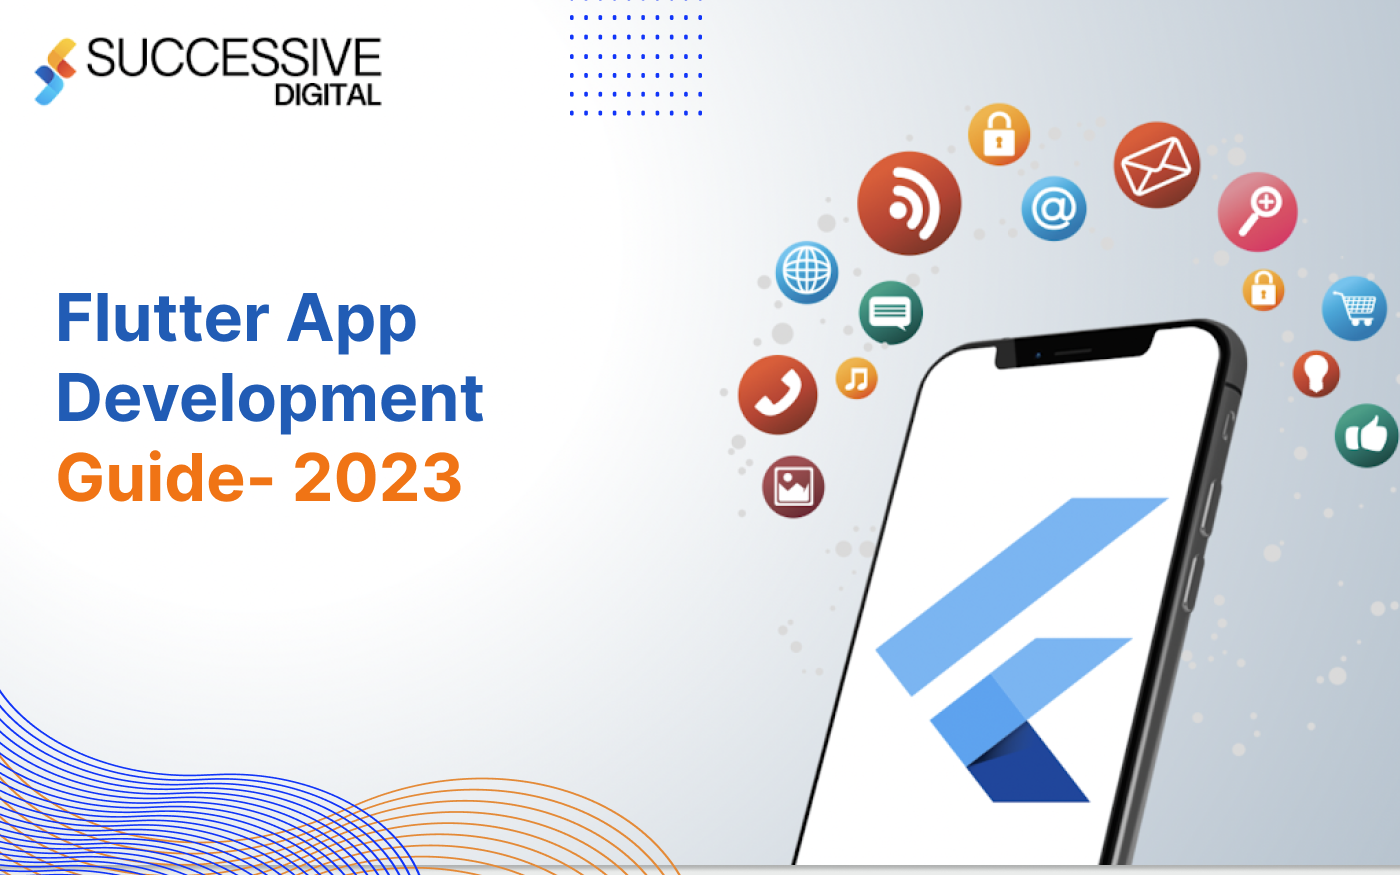 Flutter App Development Guide 2023 – All You Need to Know